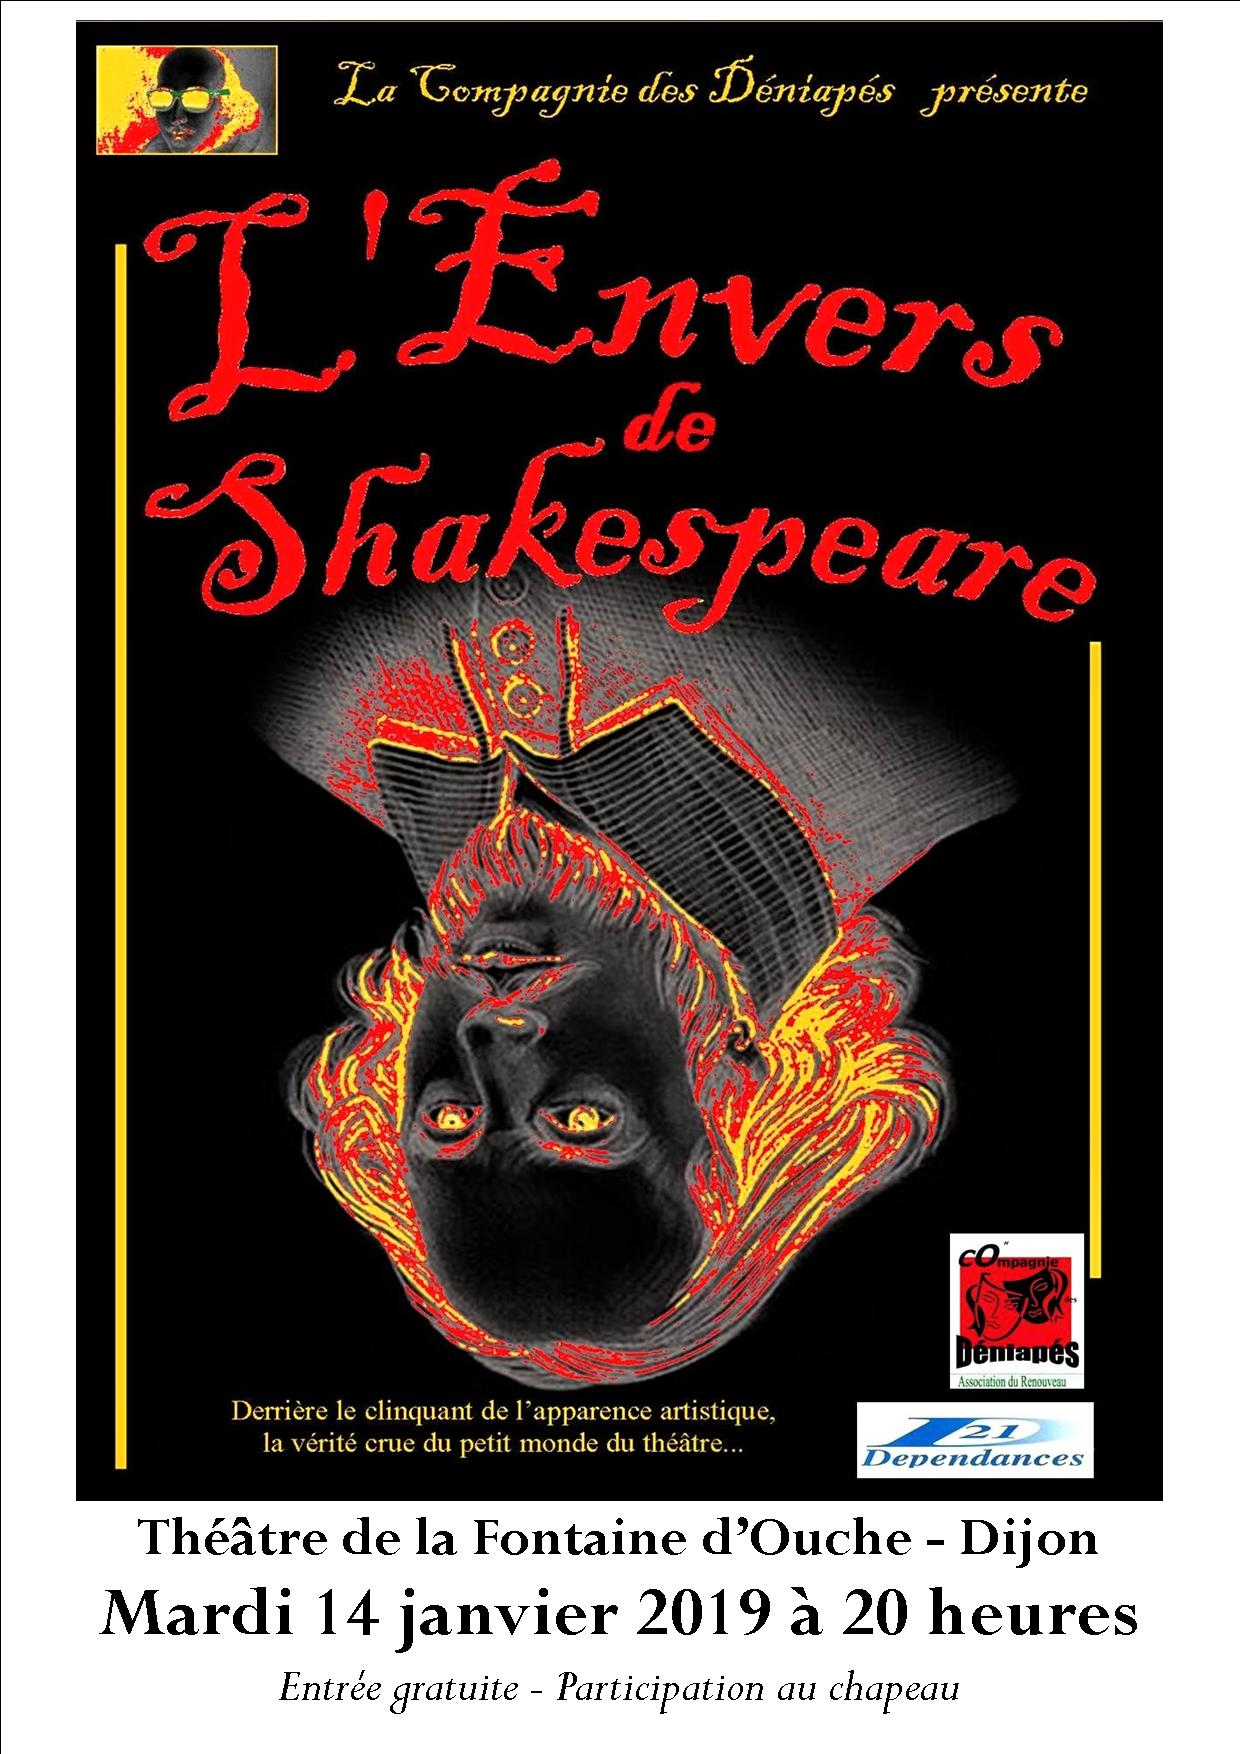 Affiche Envers Shakespeare Fontaine d'Ouche.jpg